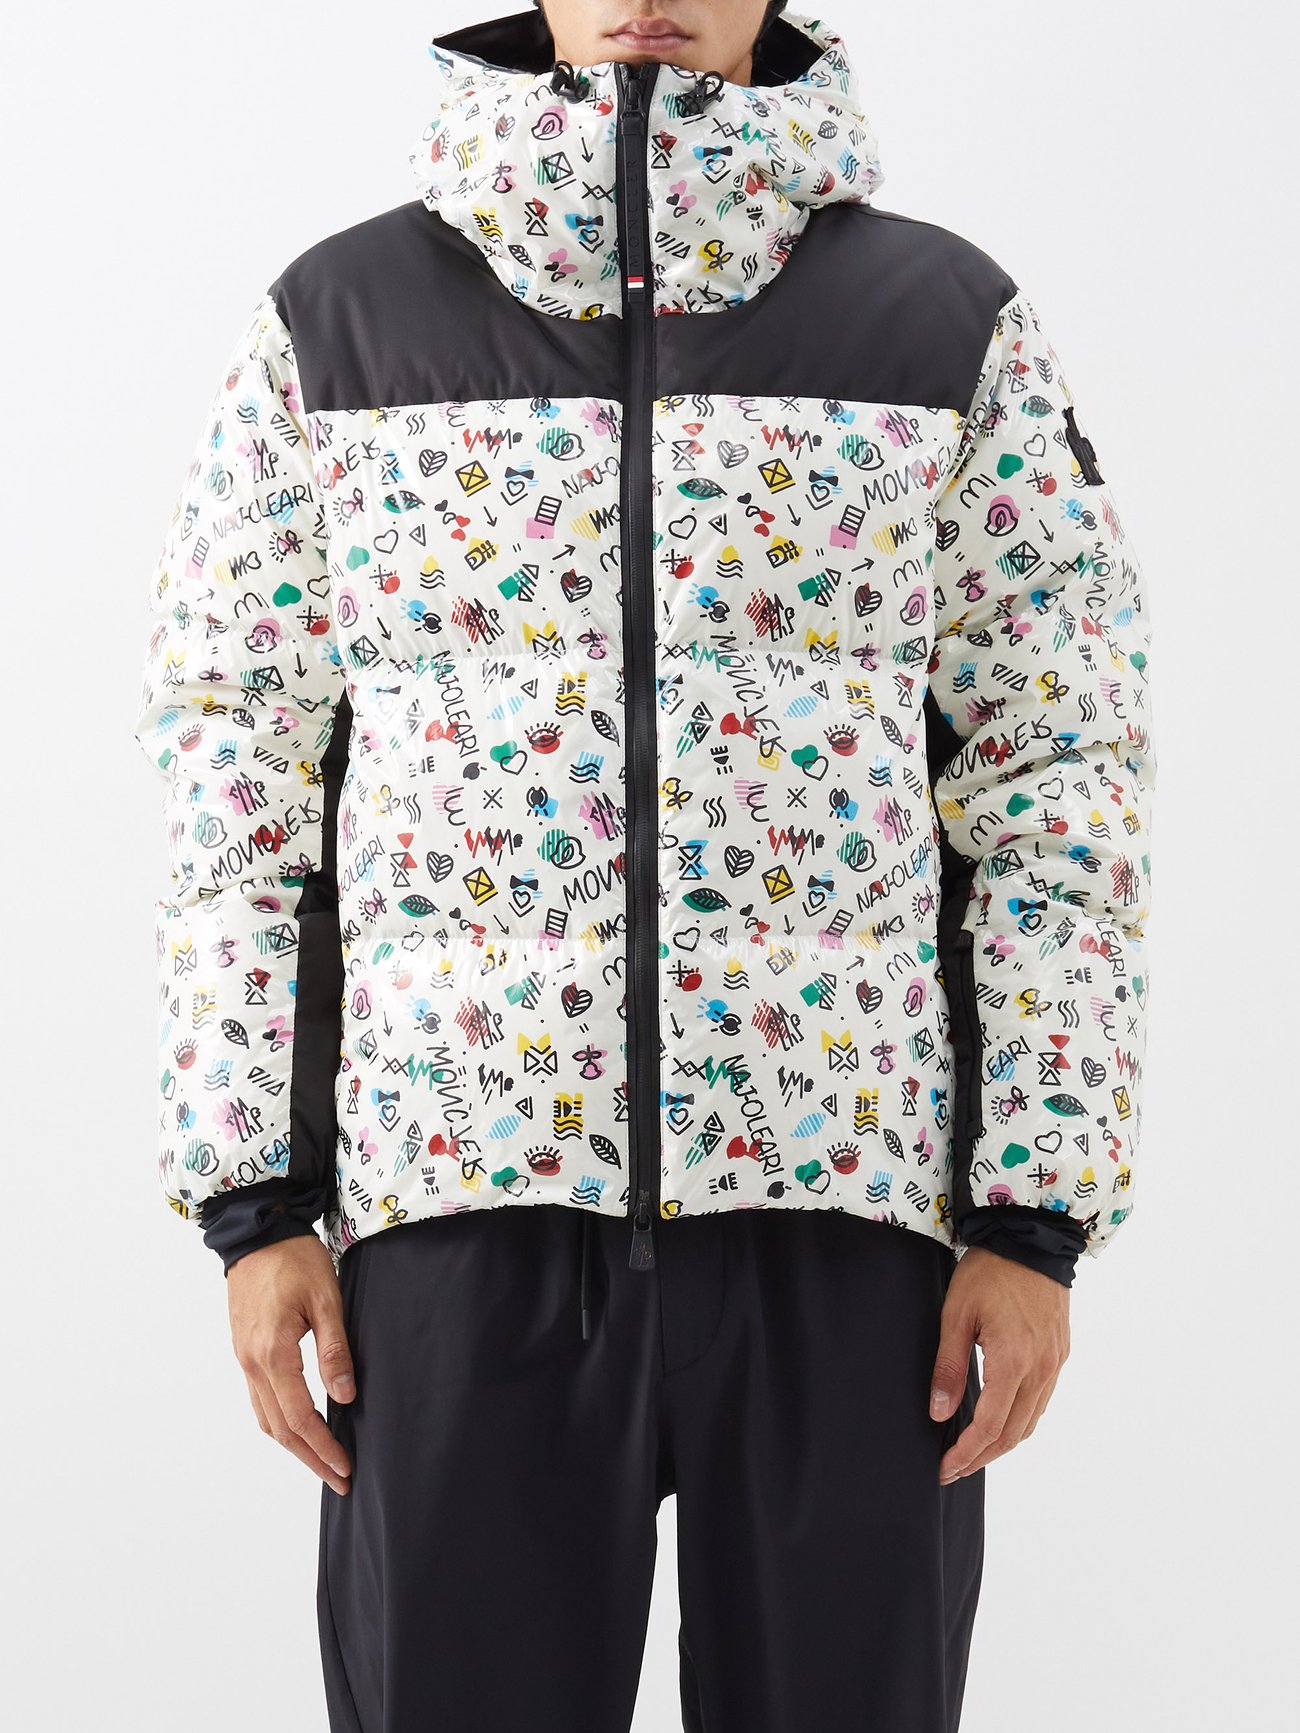 Mazod Quilted Printed Ripstop Down Ski Jacket